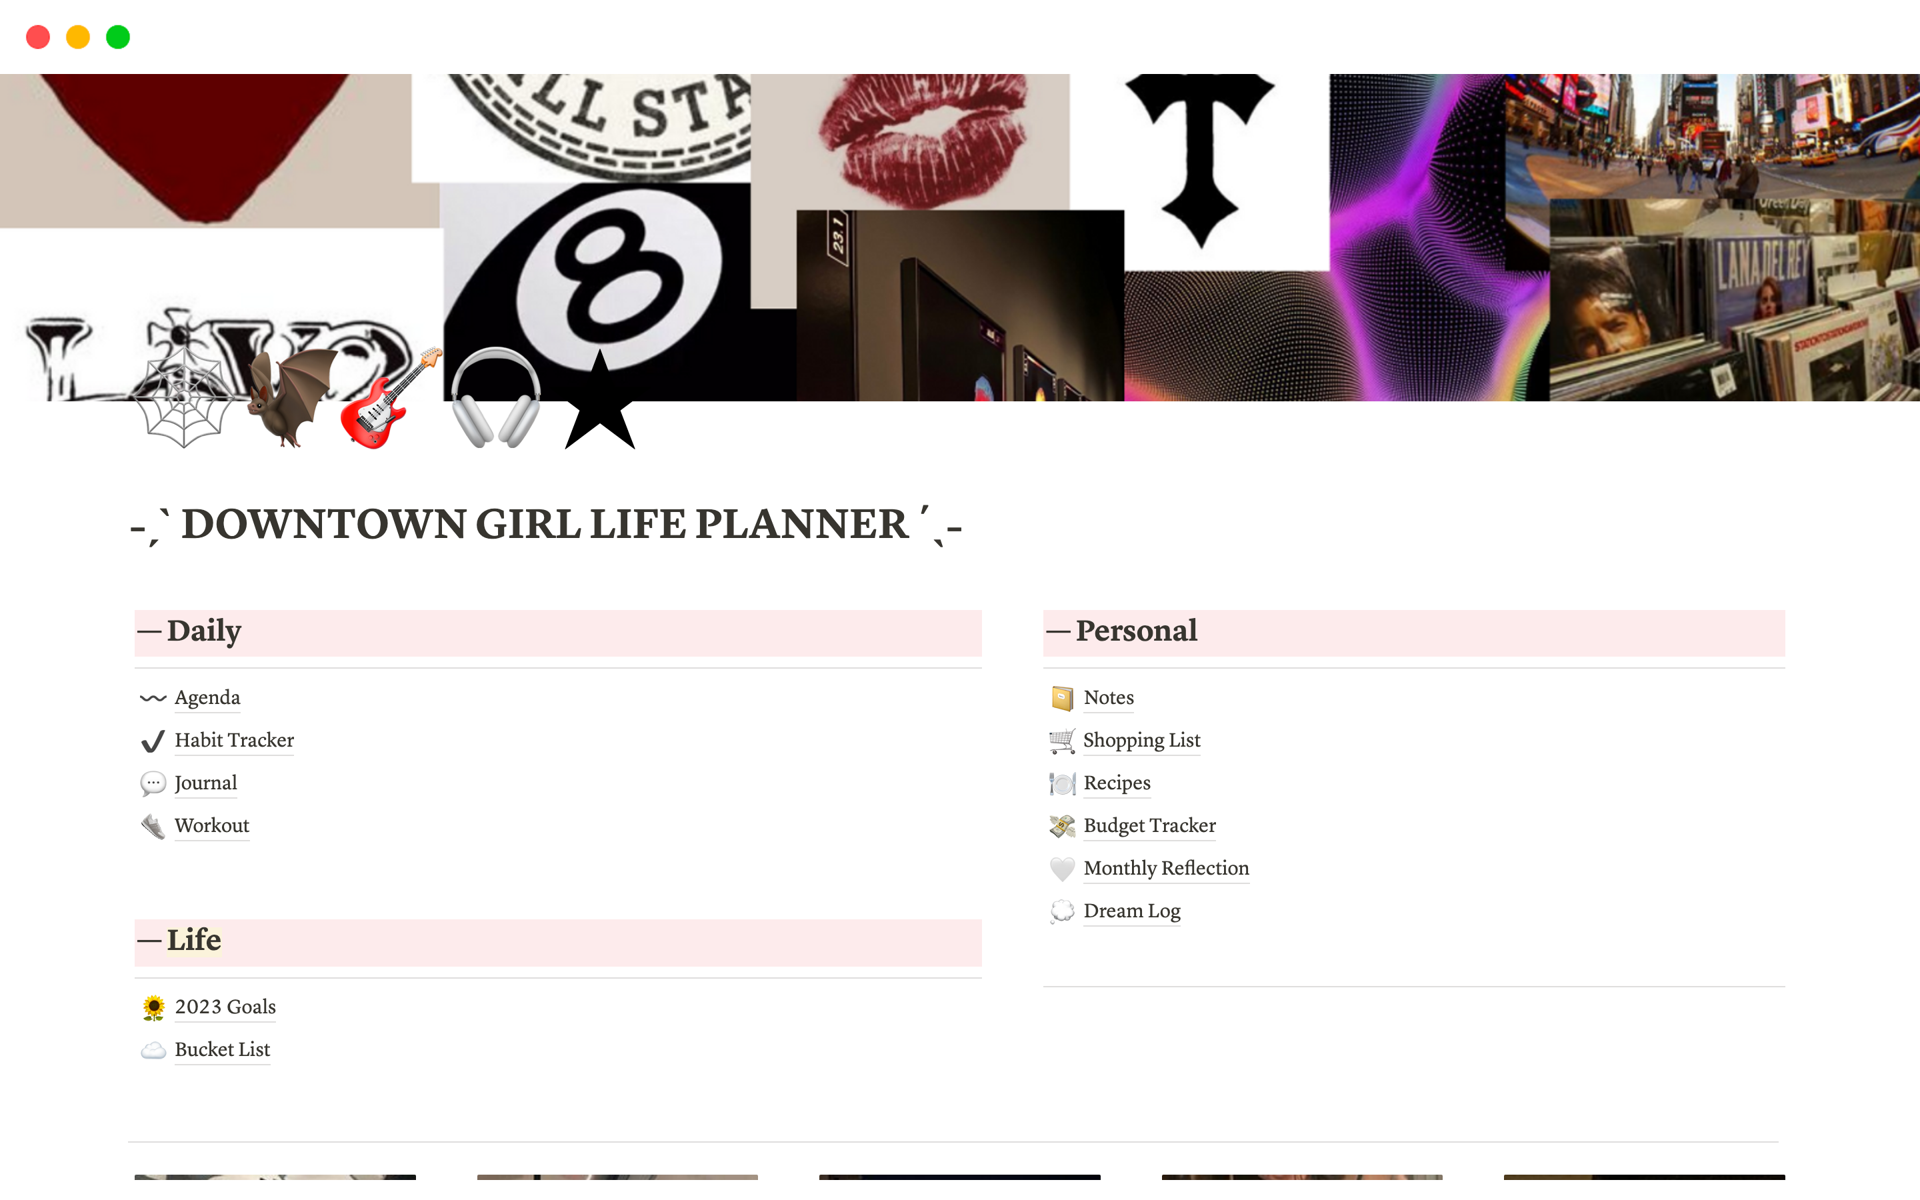 The Downtown Girl Life Planner notion template is a comprehensive organizational tool that helps young women manage their daily schedules, track goals, prioritize self-care, and stay motivated in a stylish and intuitive manner.